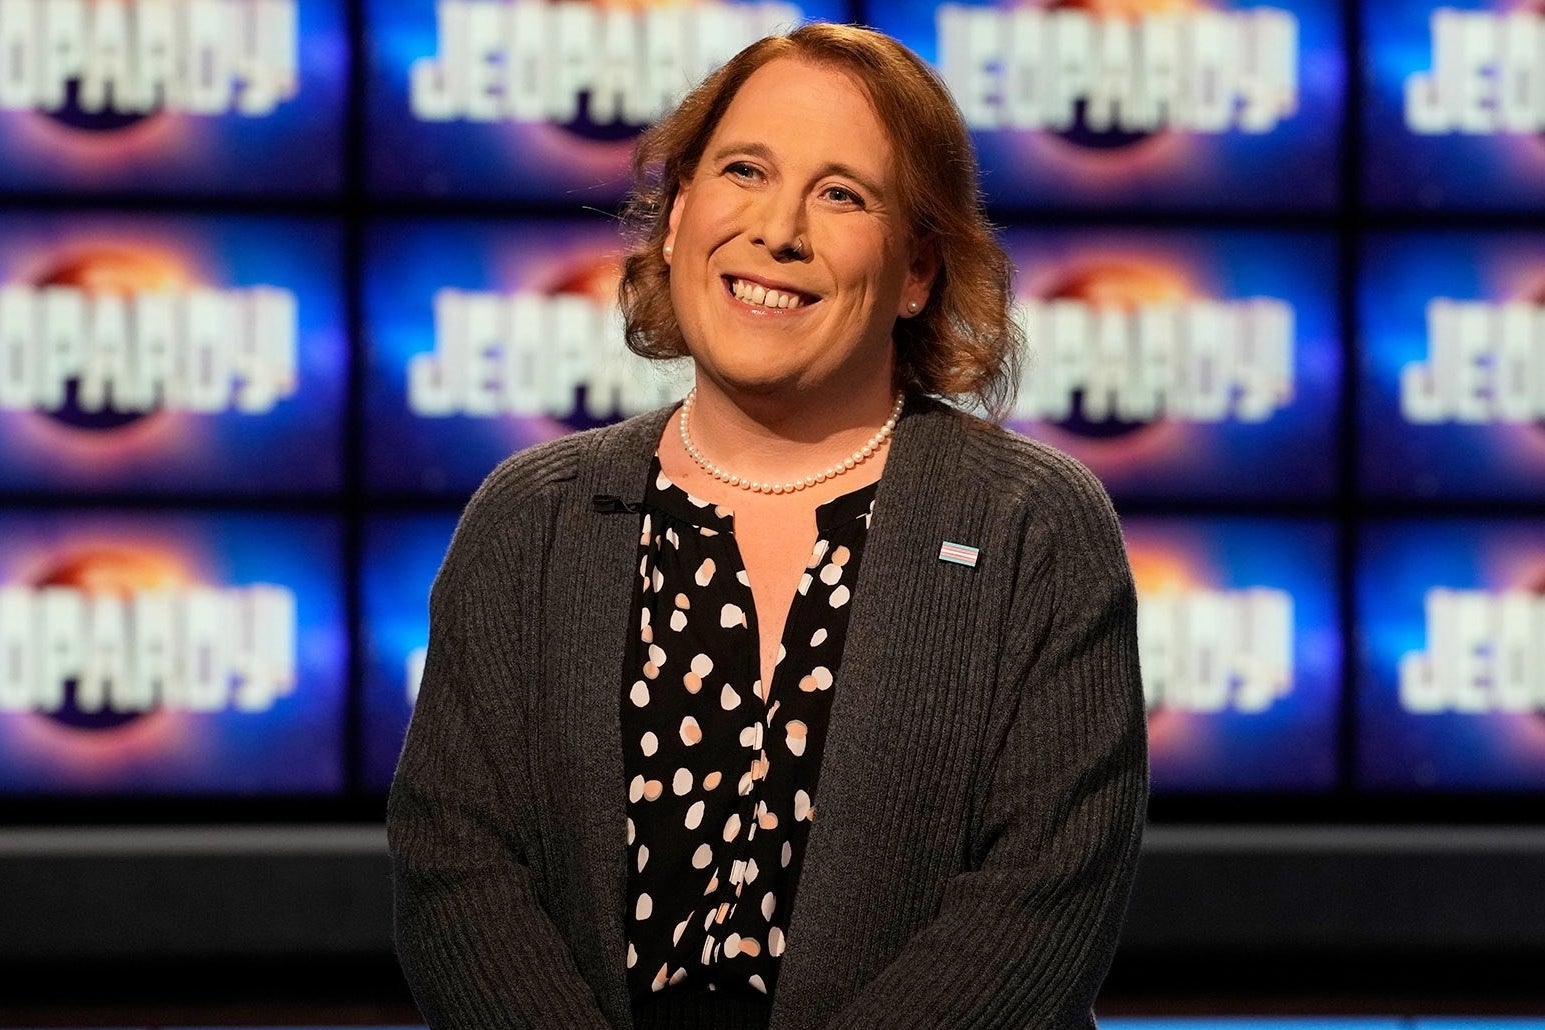 Amy Schneider’s Streak On “Jeopardy” Is Over But She’s Most Proud Of Her Transgender Representation